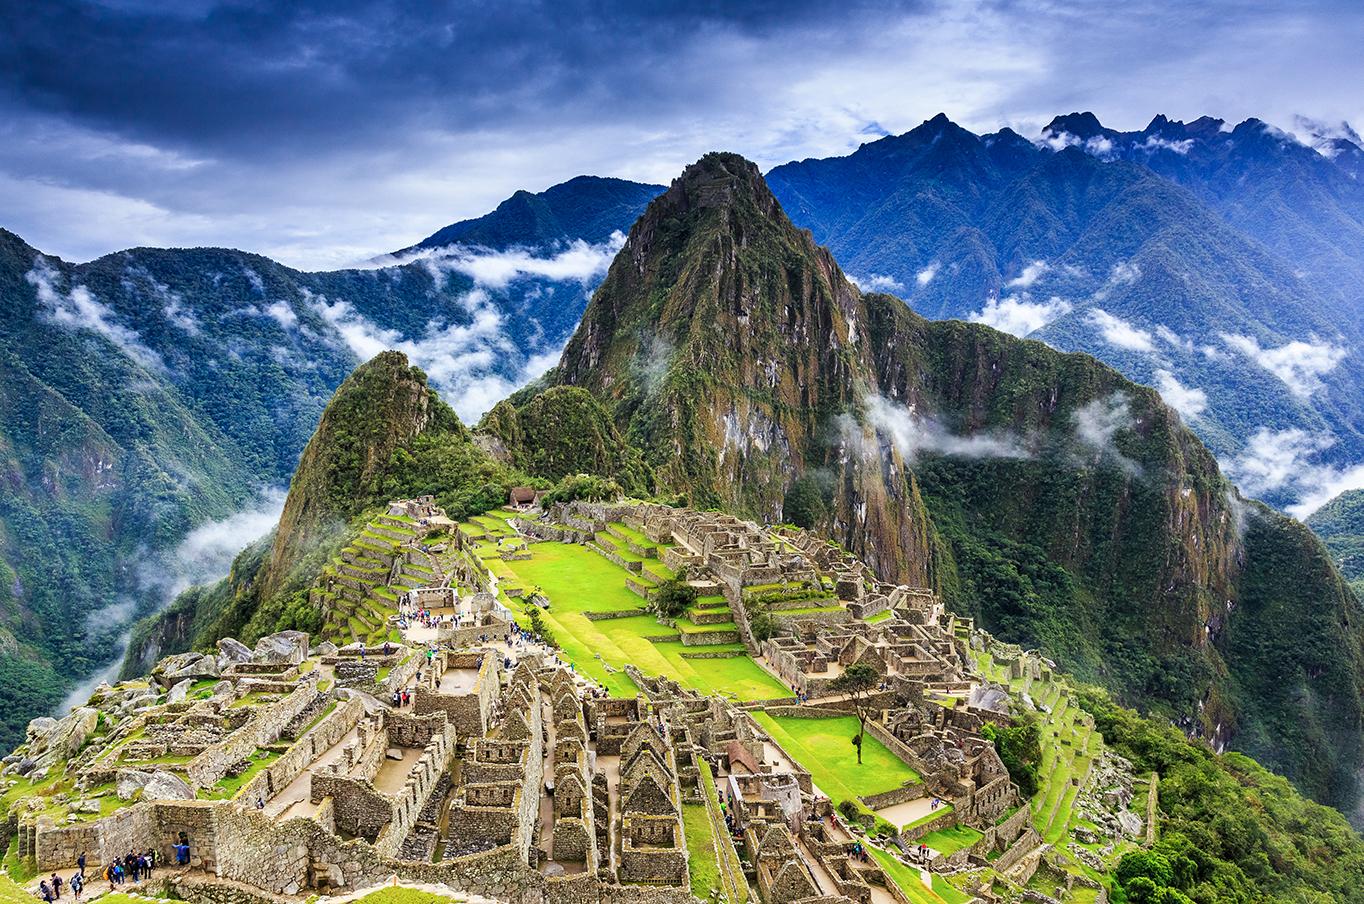 Hike up to the famous ancient city of Machu Picchu with Peru tours and excursions